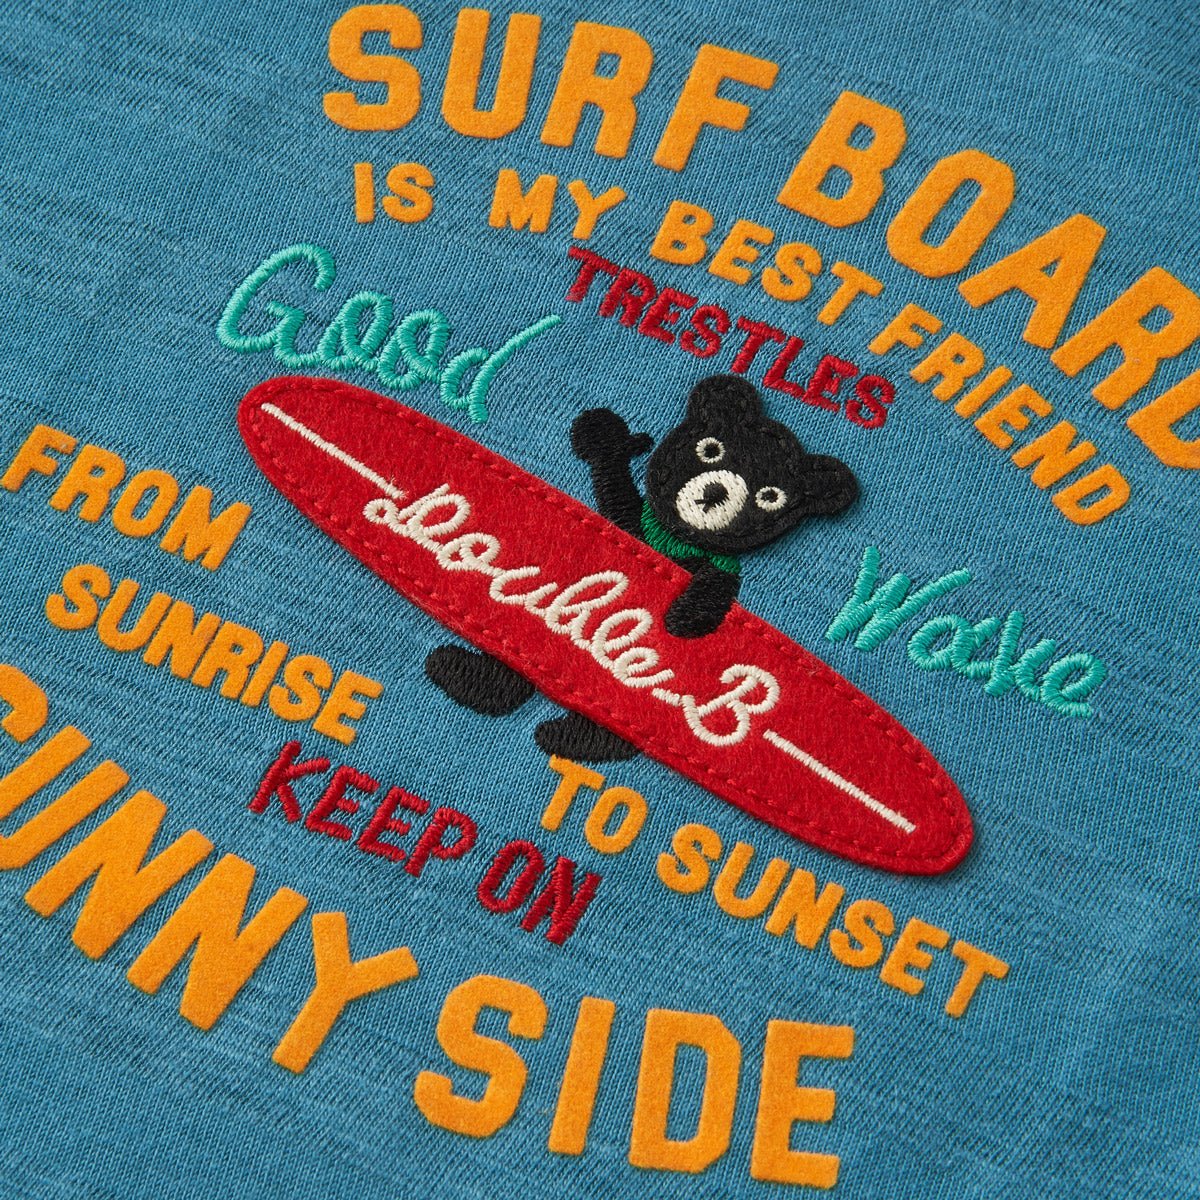 Surf with Style – DOUBLE_B Short Sleeve Tee - 62-5206-382-15-90